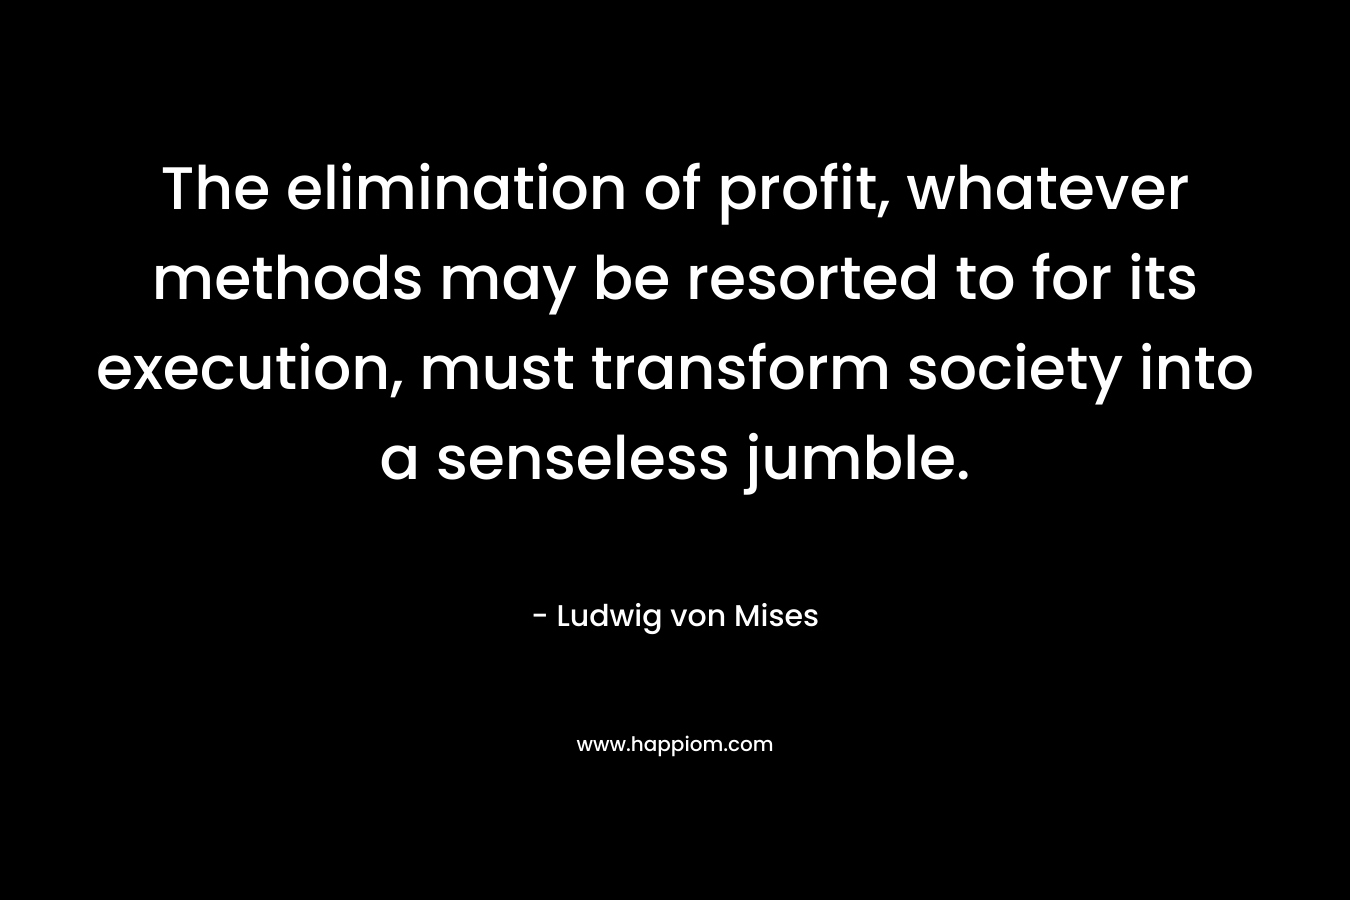 The elimination of profit, whatever methods may be resorted to for its execution, must transform society into a senseless jumble.